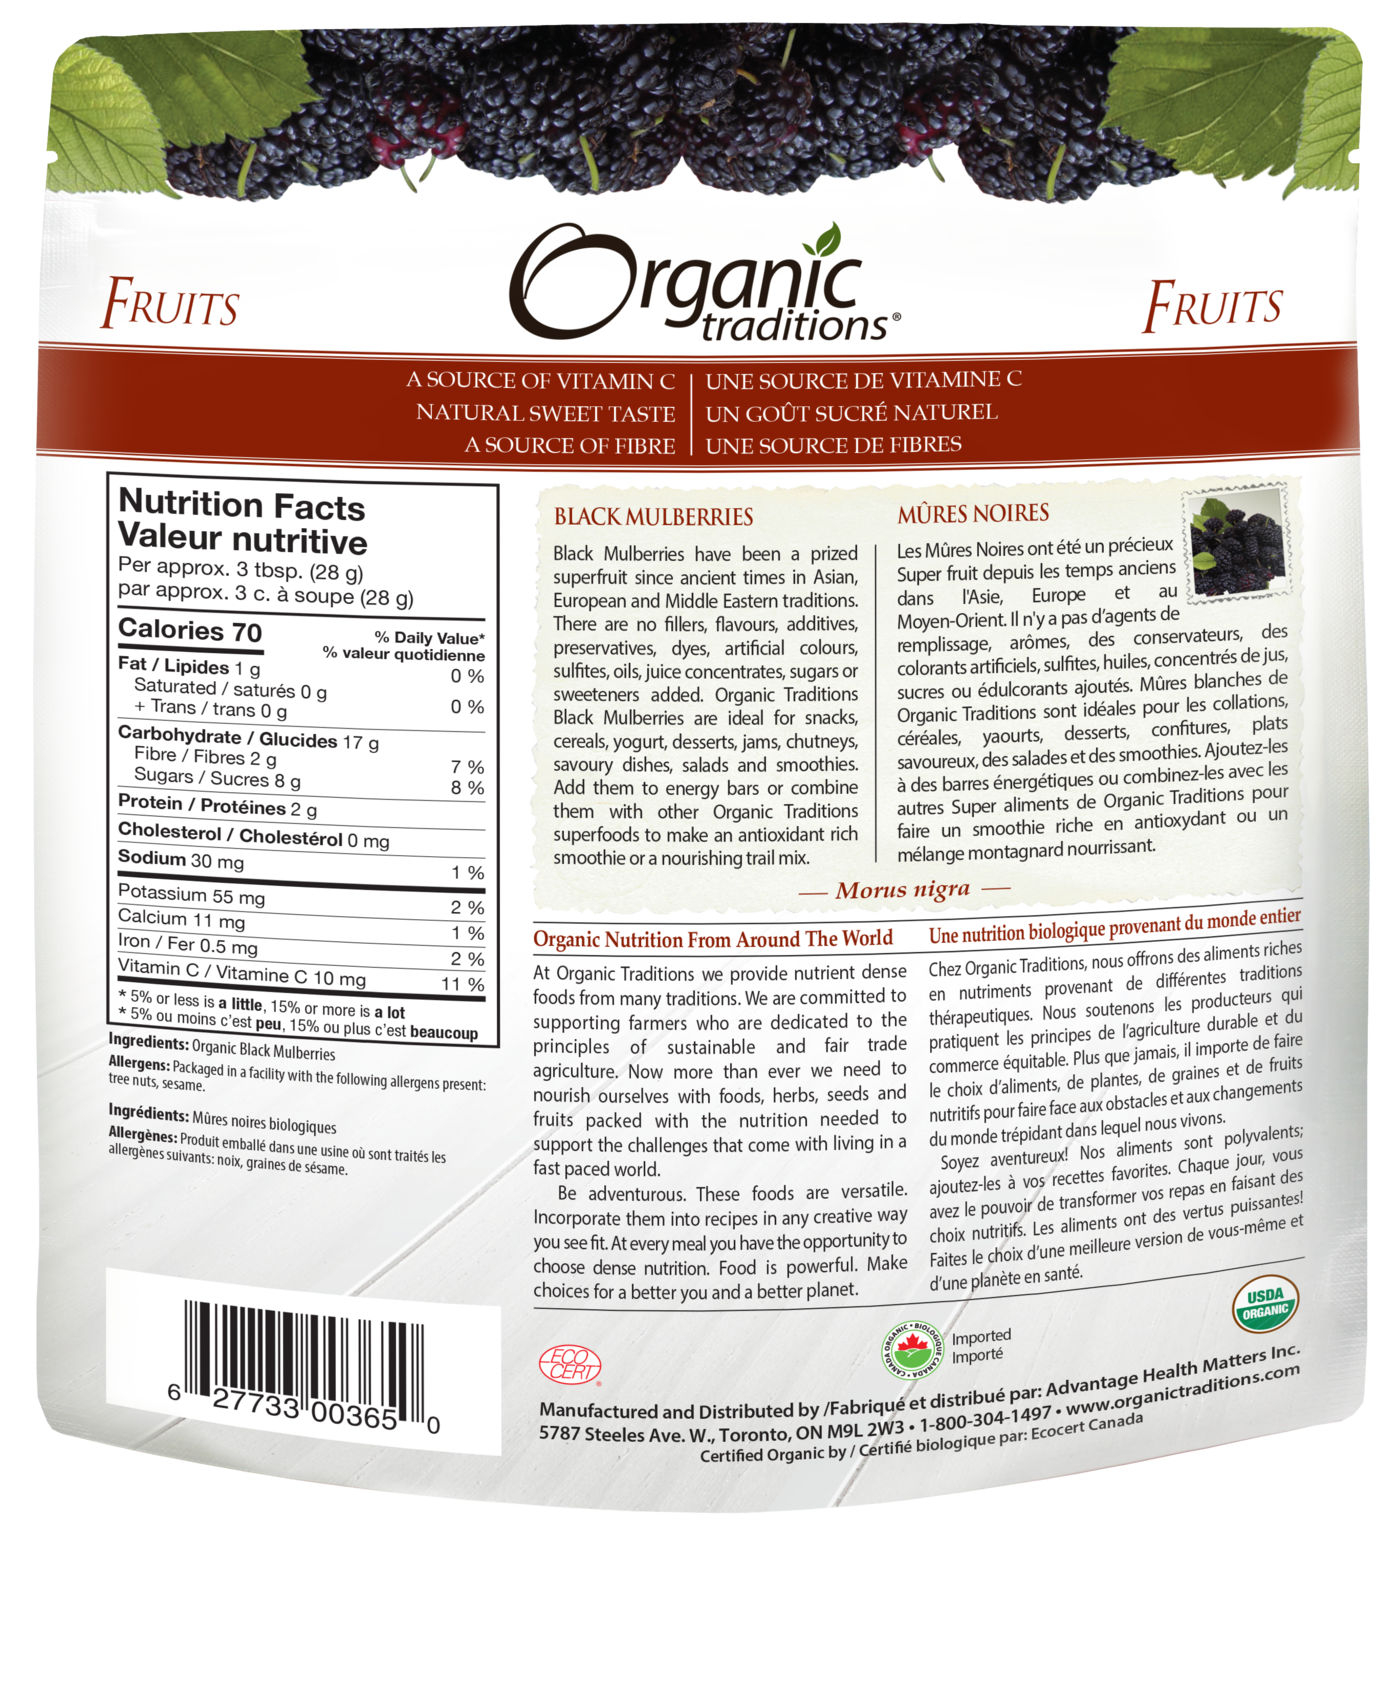 Organic Traditions Black Dried Mulberries